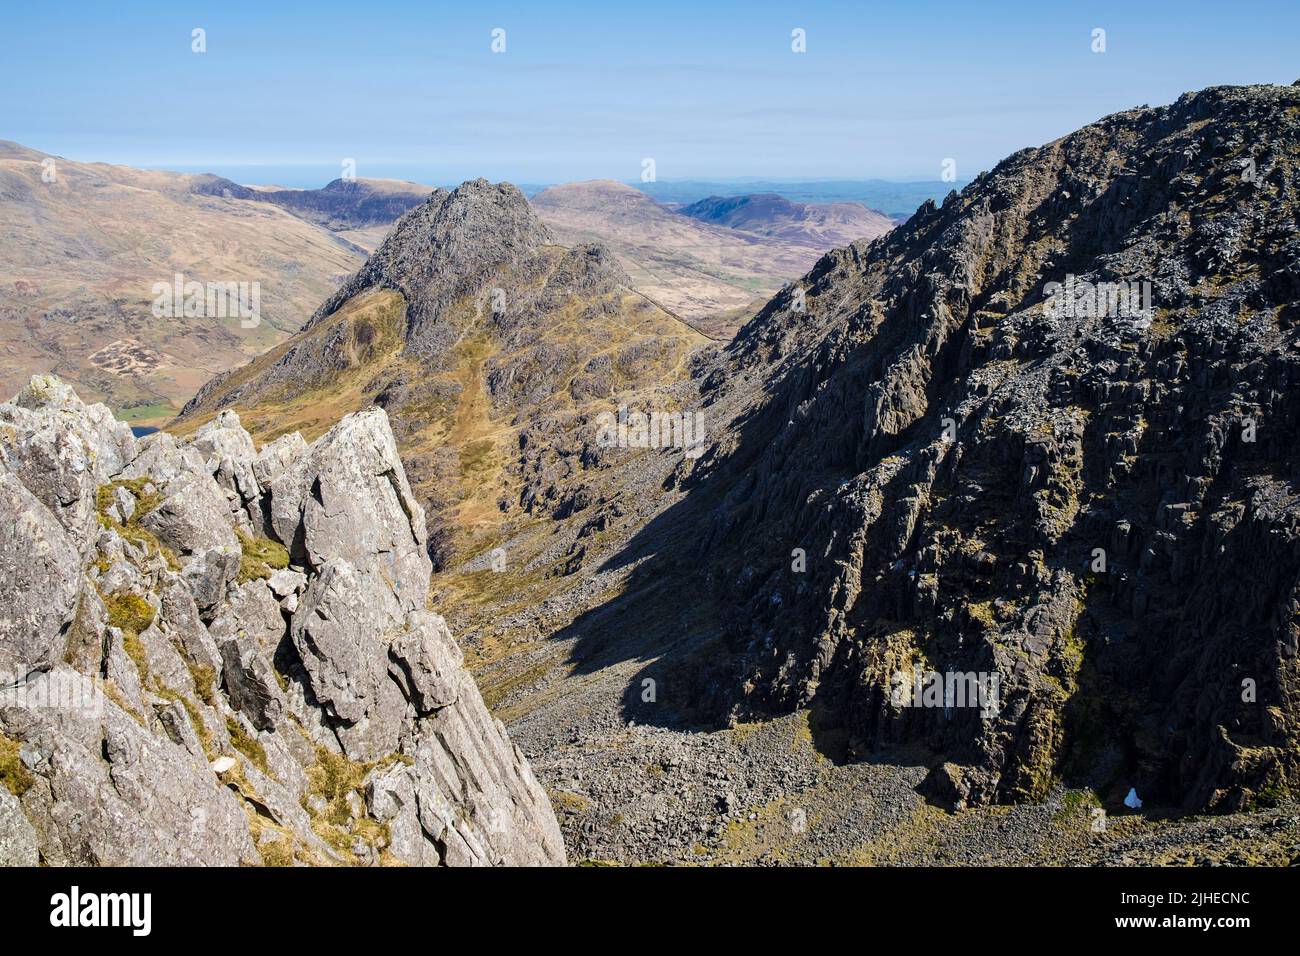 Mount Tryfan and Bristly Ridge on Glyder Fach from west side above Cwm Bochlwyd in Snowdonia National Park. Ogwen valley, Conwy, Wales, UK, Britain Stock Photo